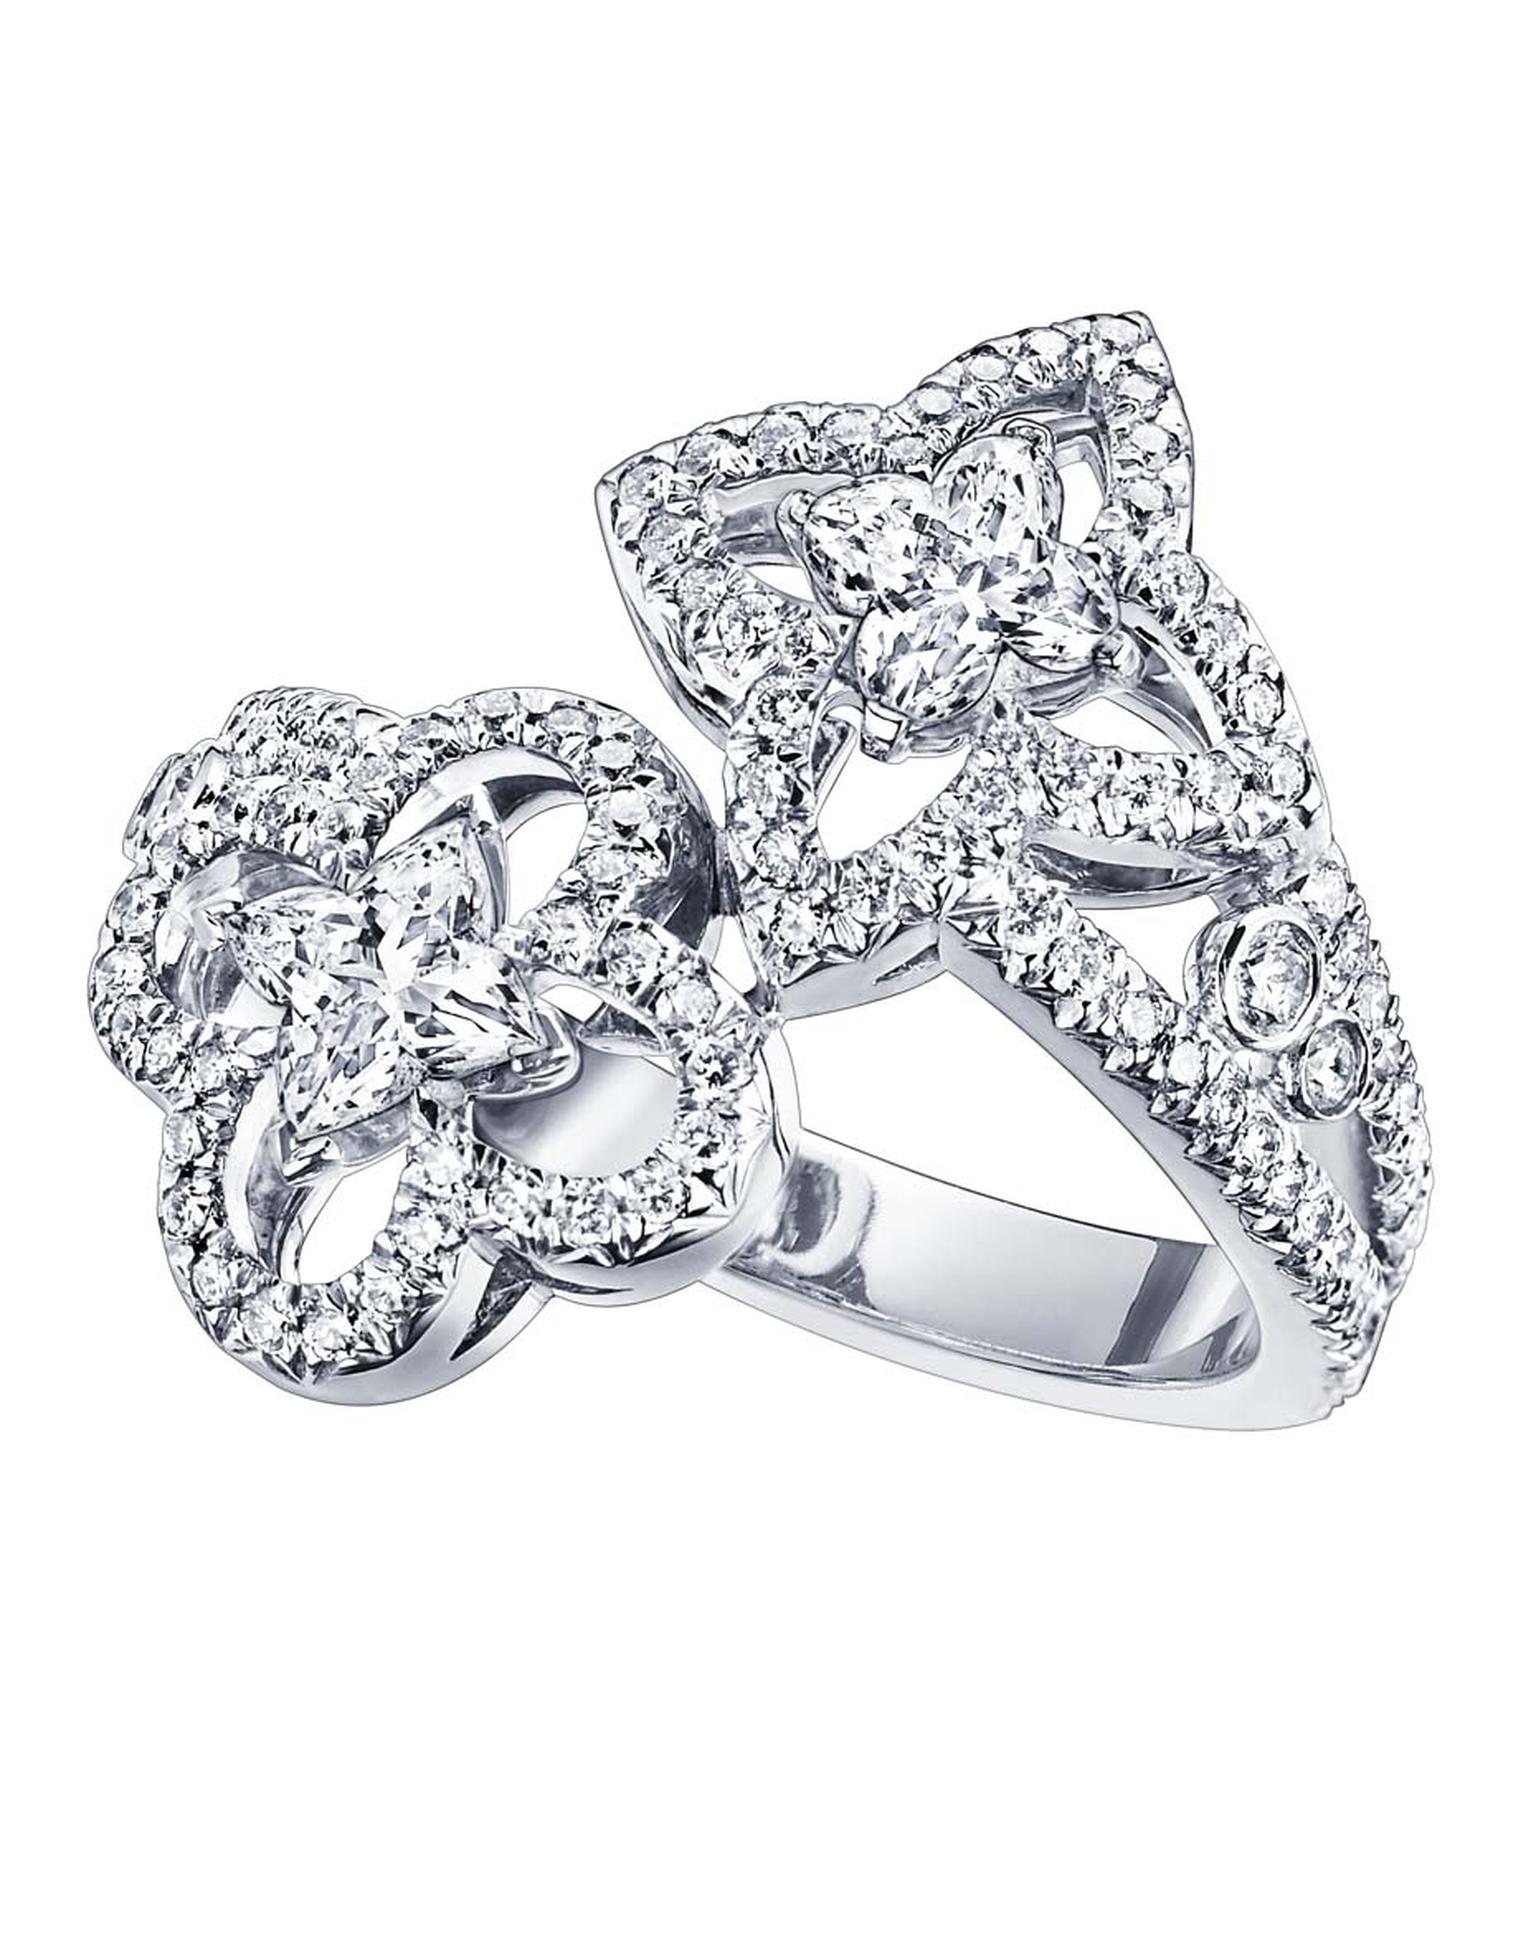 The most romantic of the Monogram Fusion Louis Vuitton rings is the Toi et Moi style, where a star and flower diamond come together, snugly wrapped around the finger.